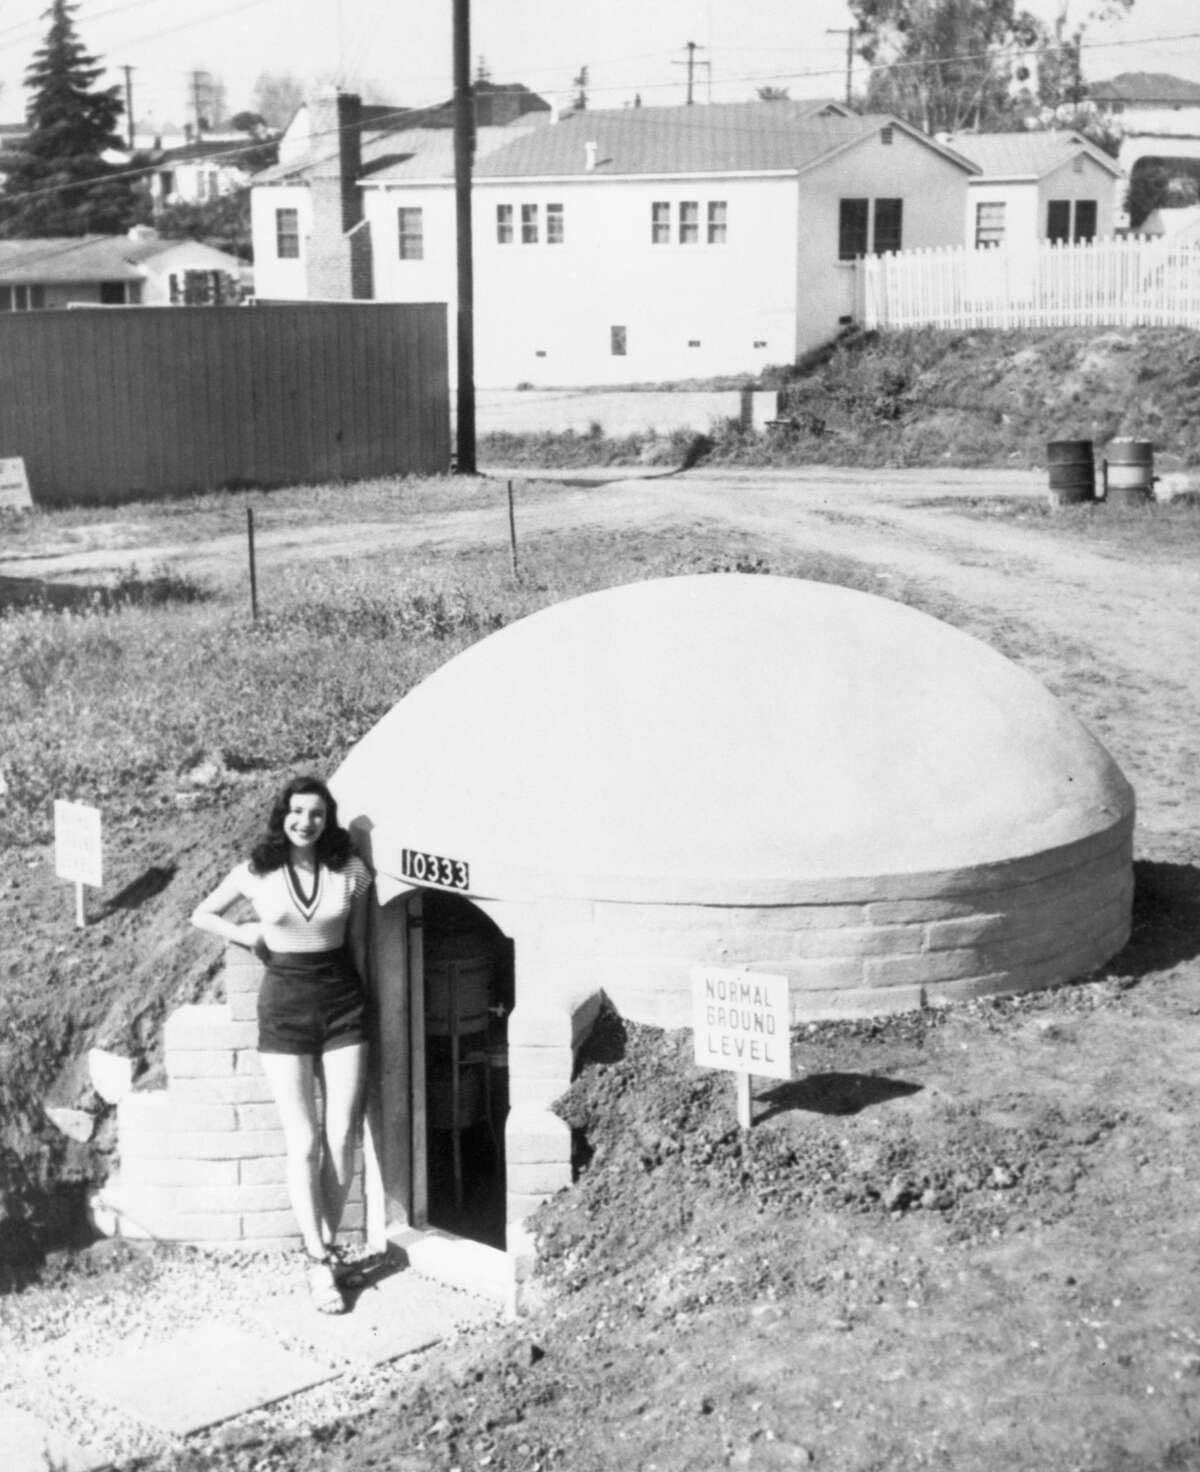 west virginia nuclear fallout shelter